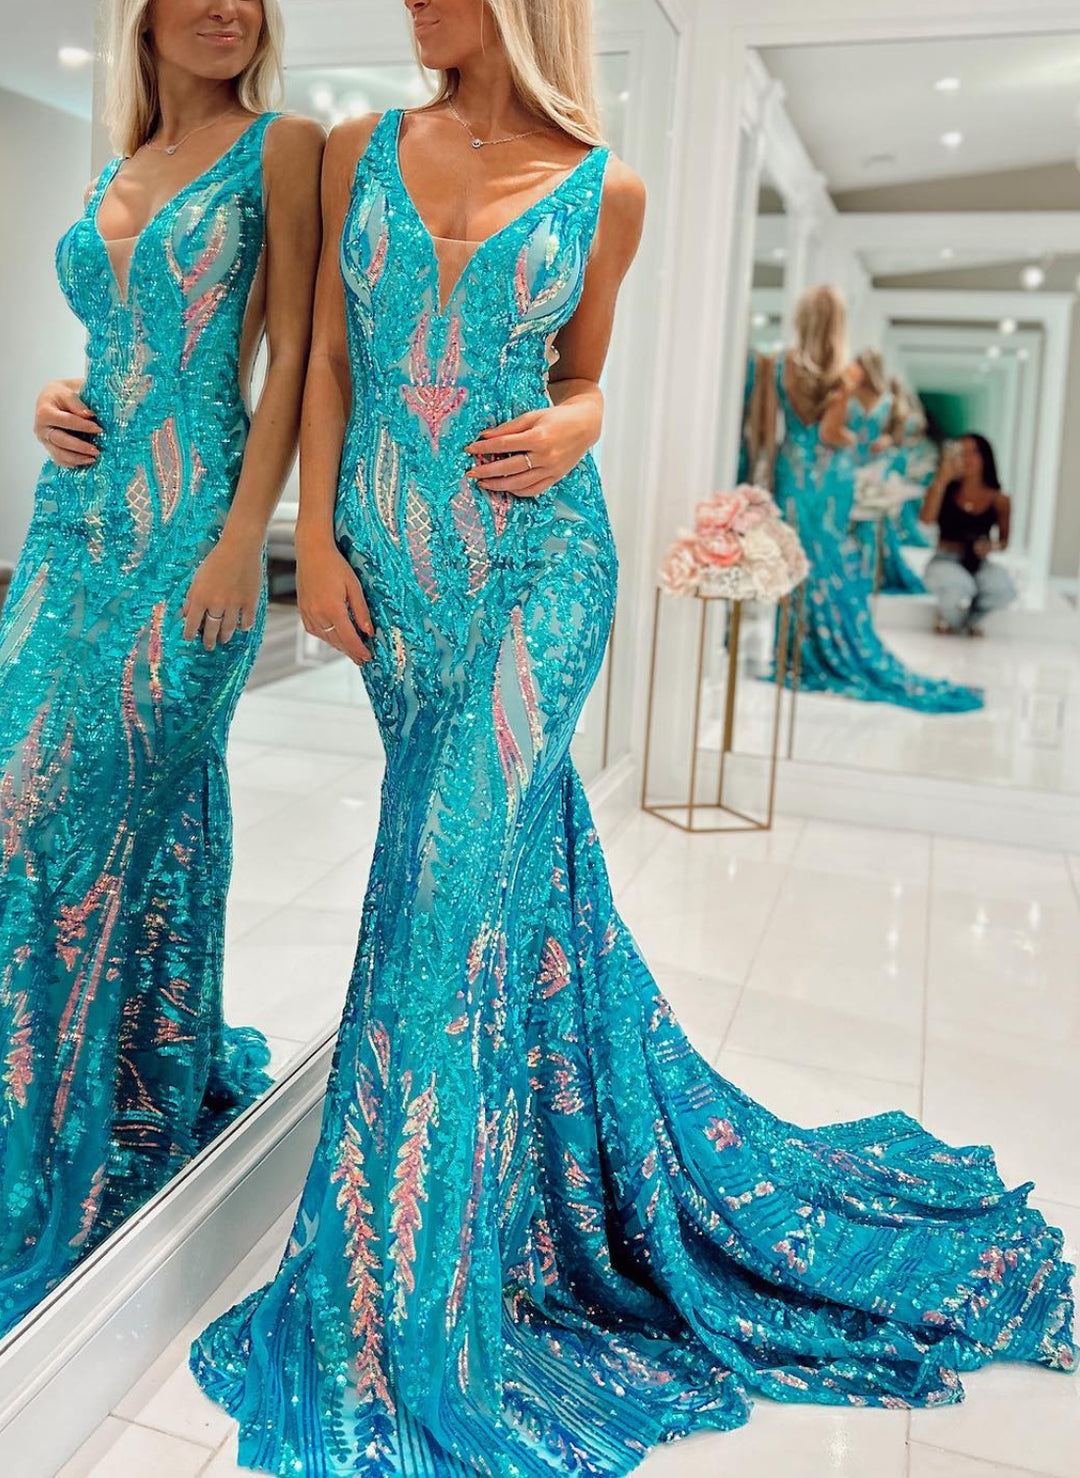 Trumpet/Mermaid V-Neck Sleeveless Floor-length Long Prom Floral Dresses with Sequins